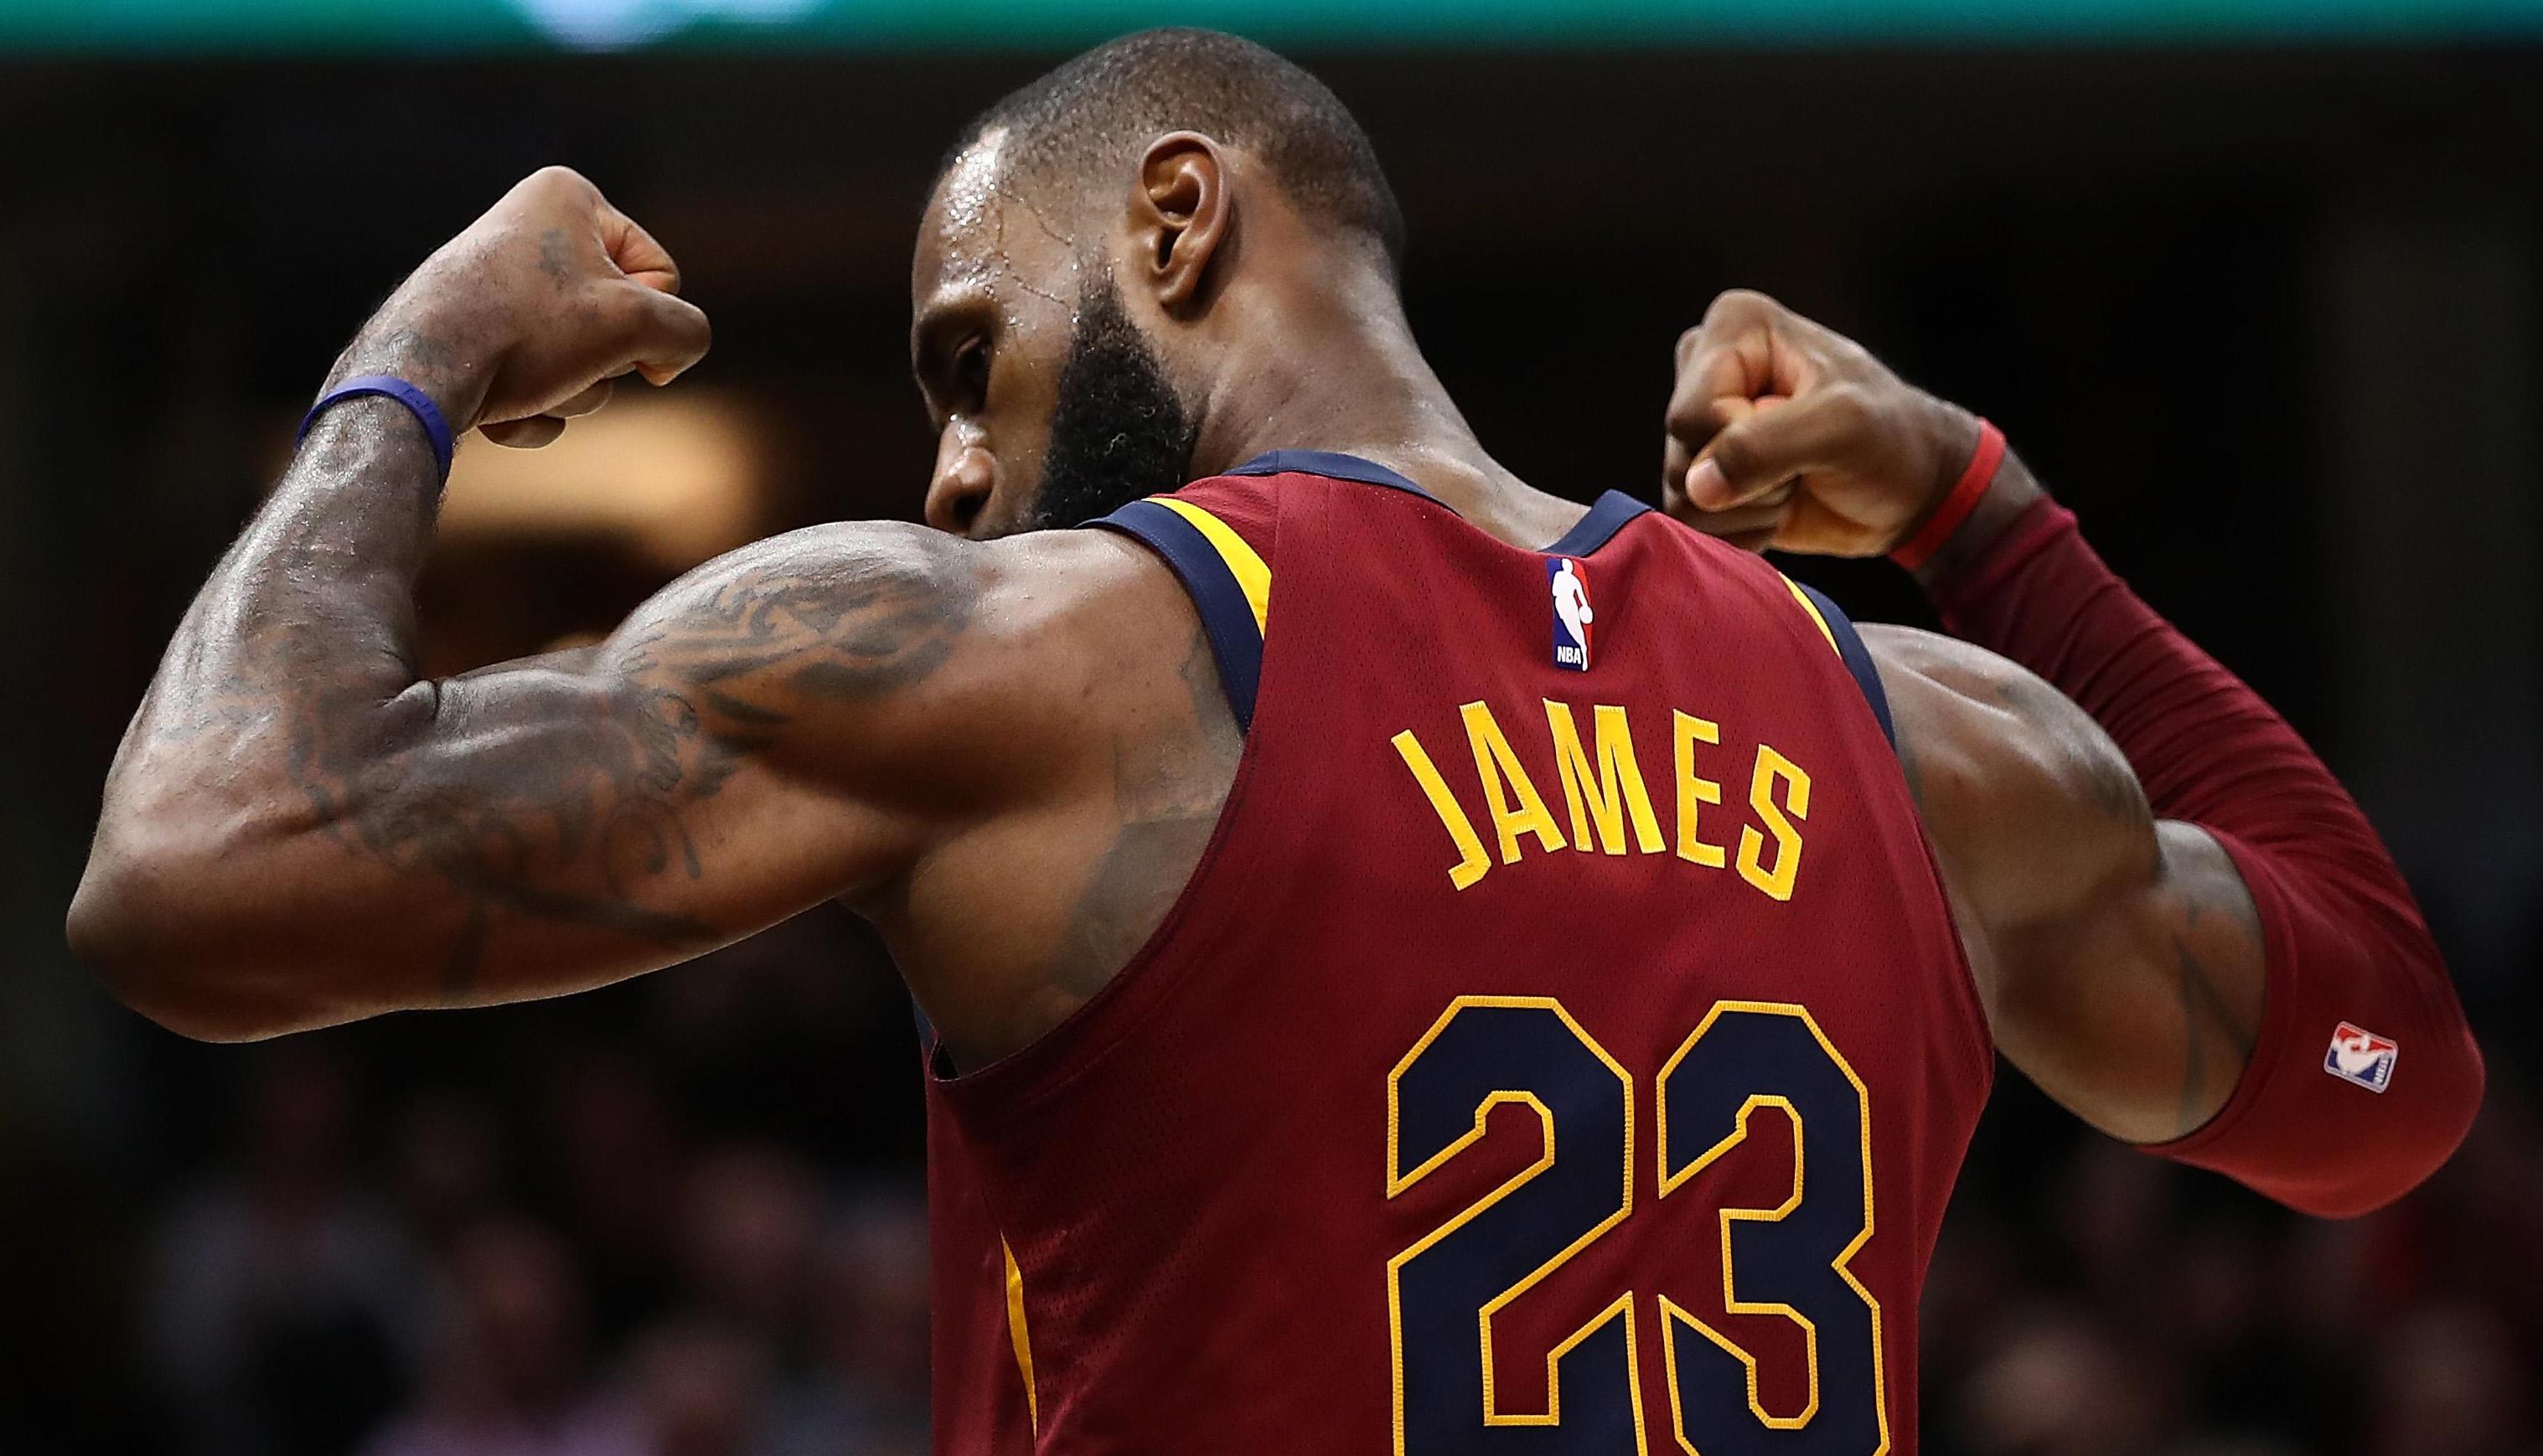 Training Ground Guru | LeBron James and why context is key with data